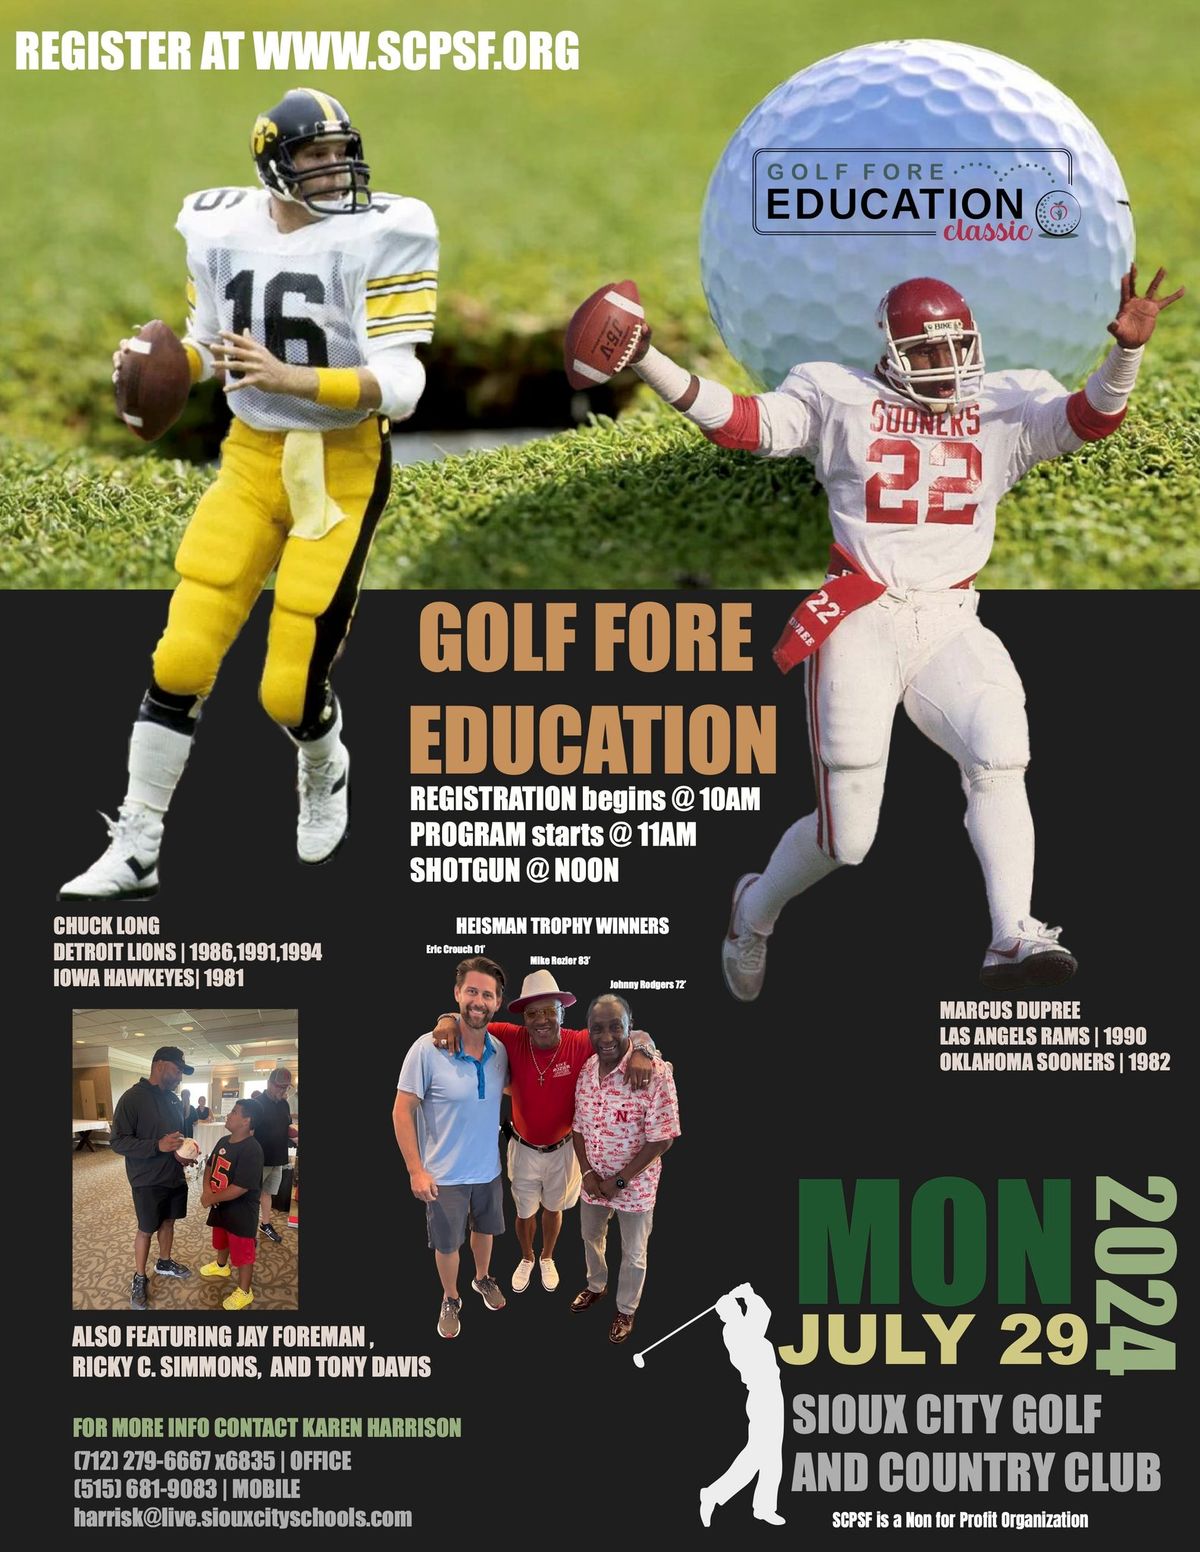 Golf FORE Education Celebrity Classic